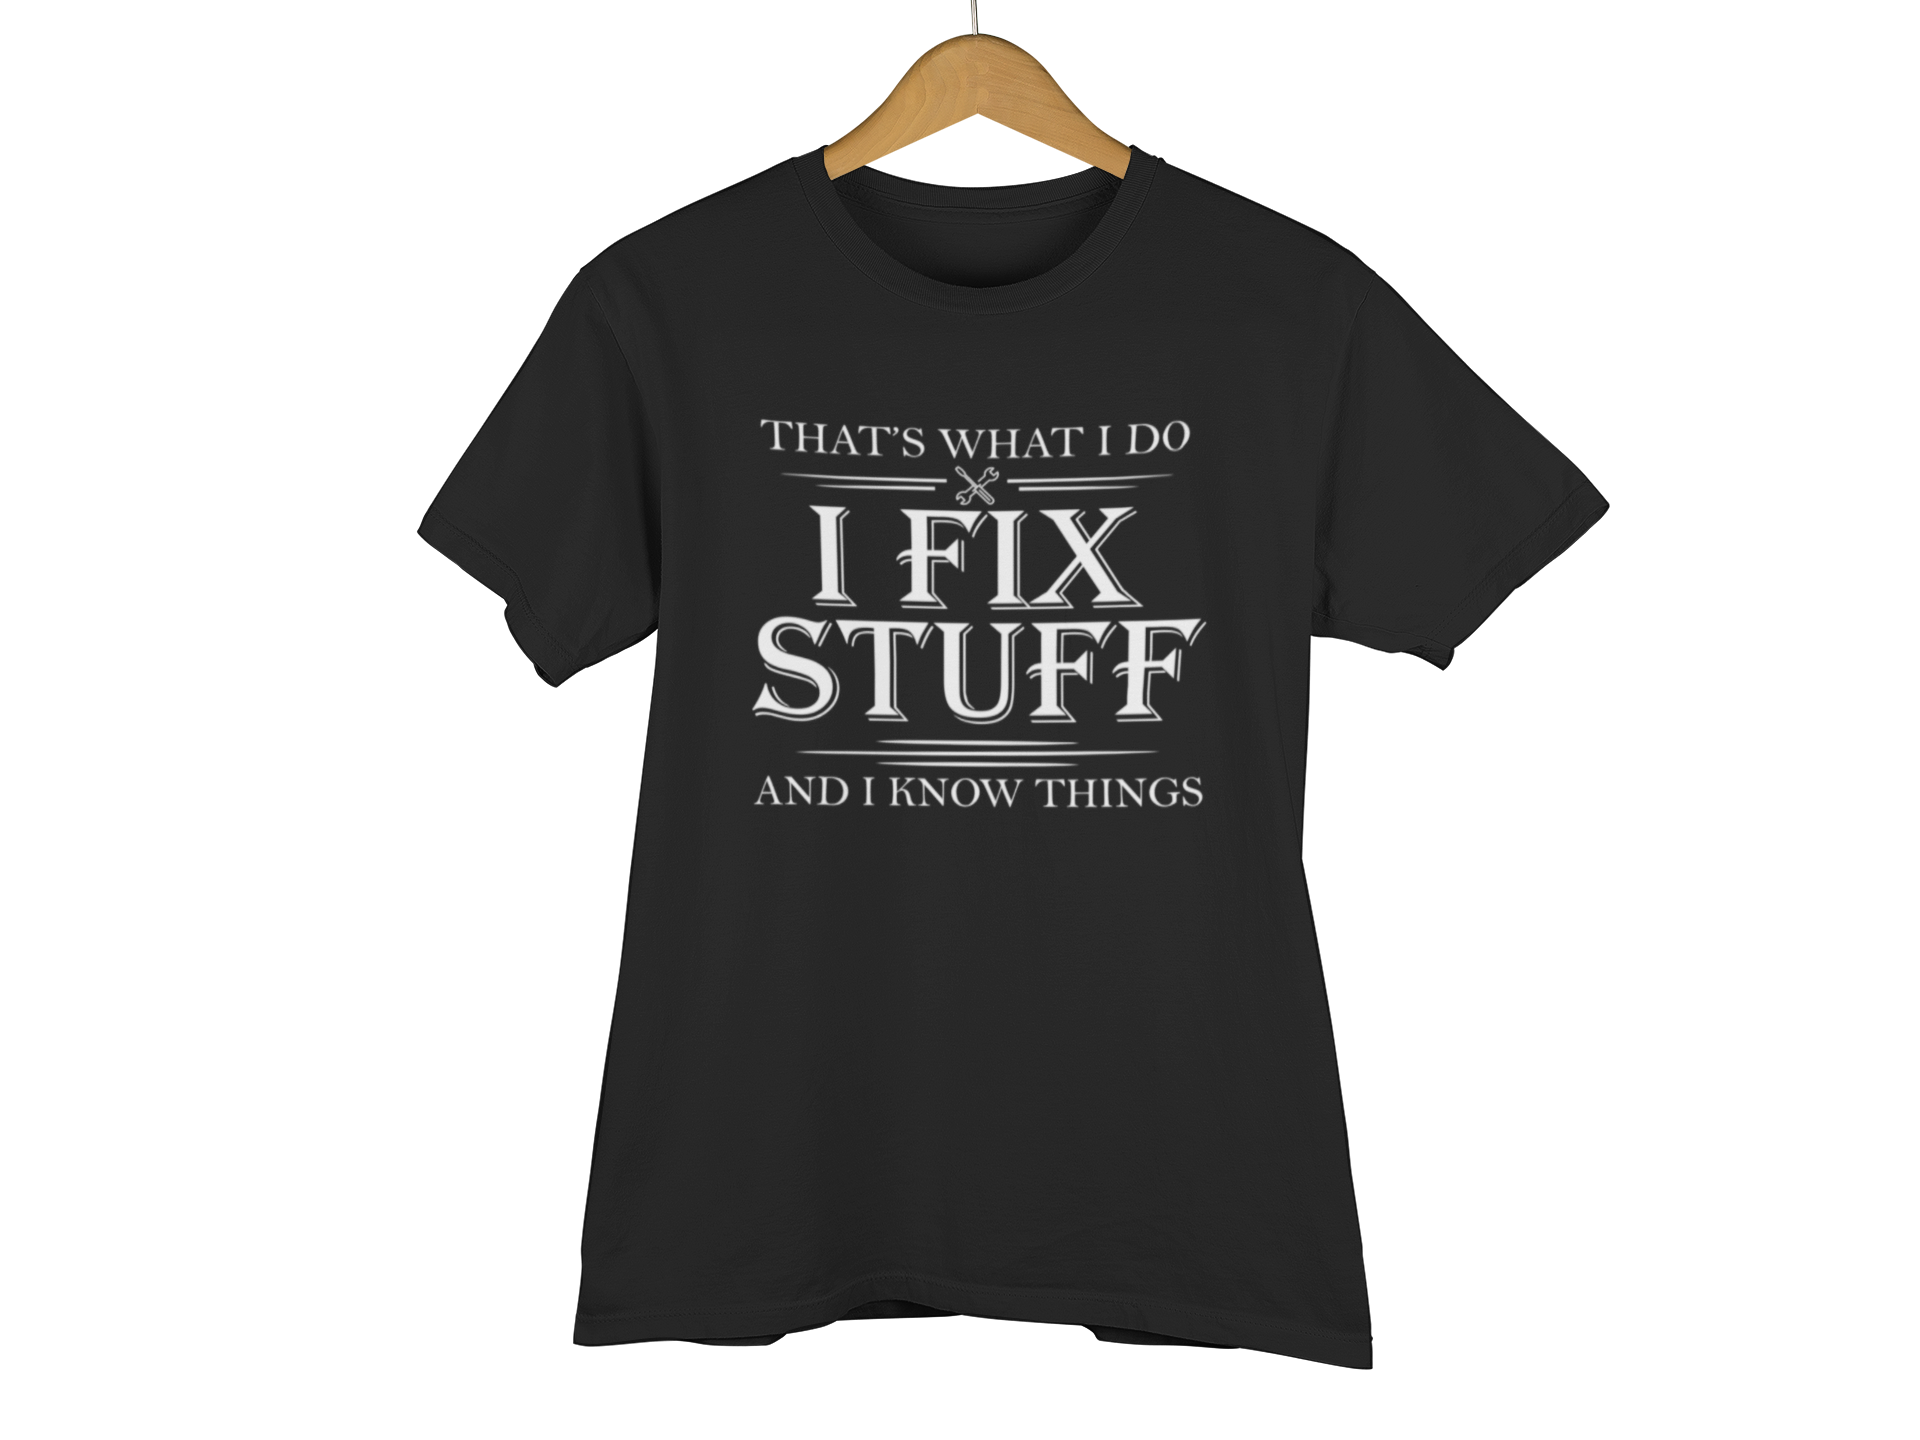 That's what I do I fix stuff and I know things - Teeshirt in Black